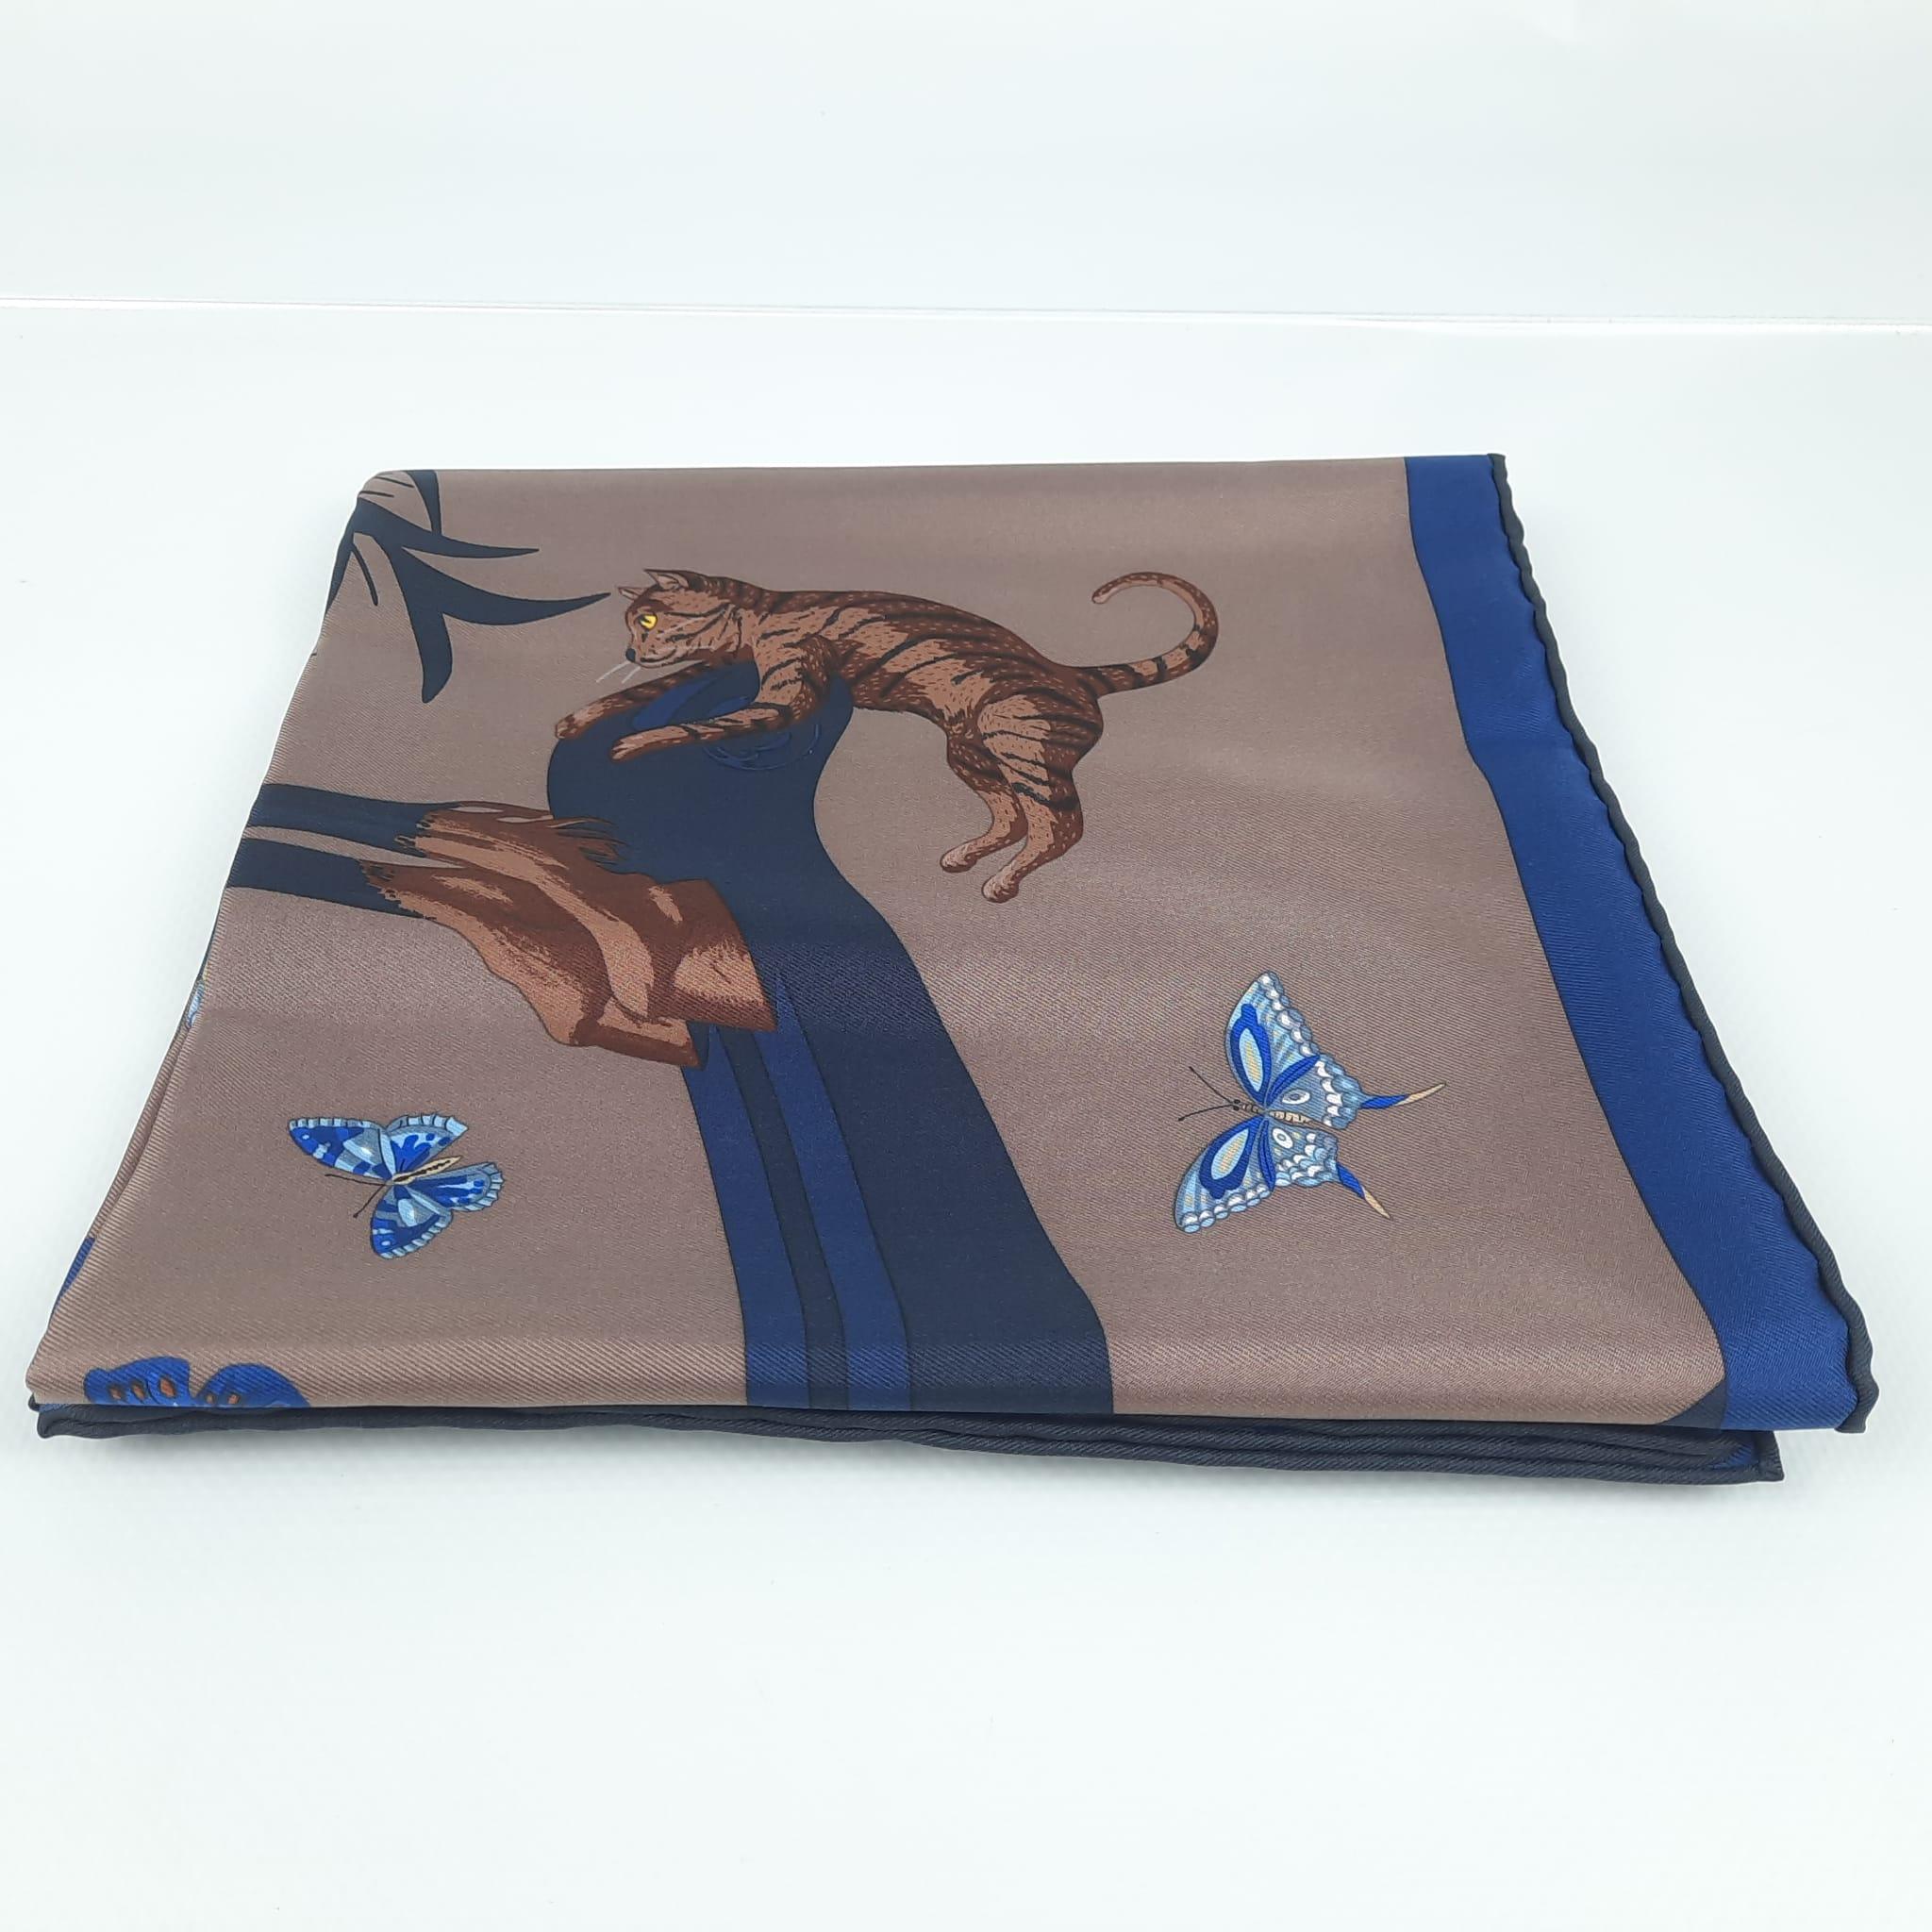 Scarf in silk twill with hand-rolled edges (100% silk).
This essential Hermès accessory complements any outfit. It can be worn many ways - around your neck, as a top, at the waist or as a headscarf!
Designed by Jonathan Burton